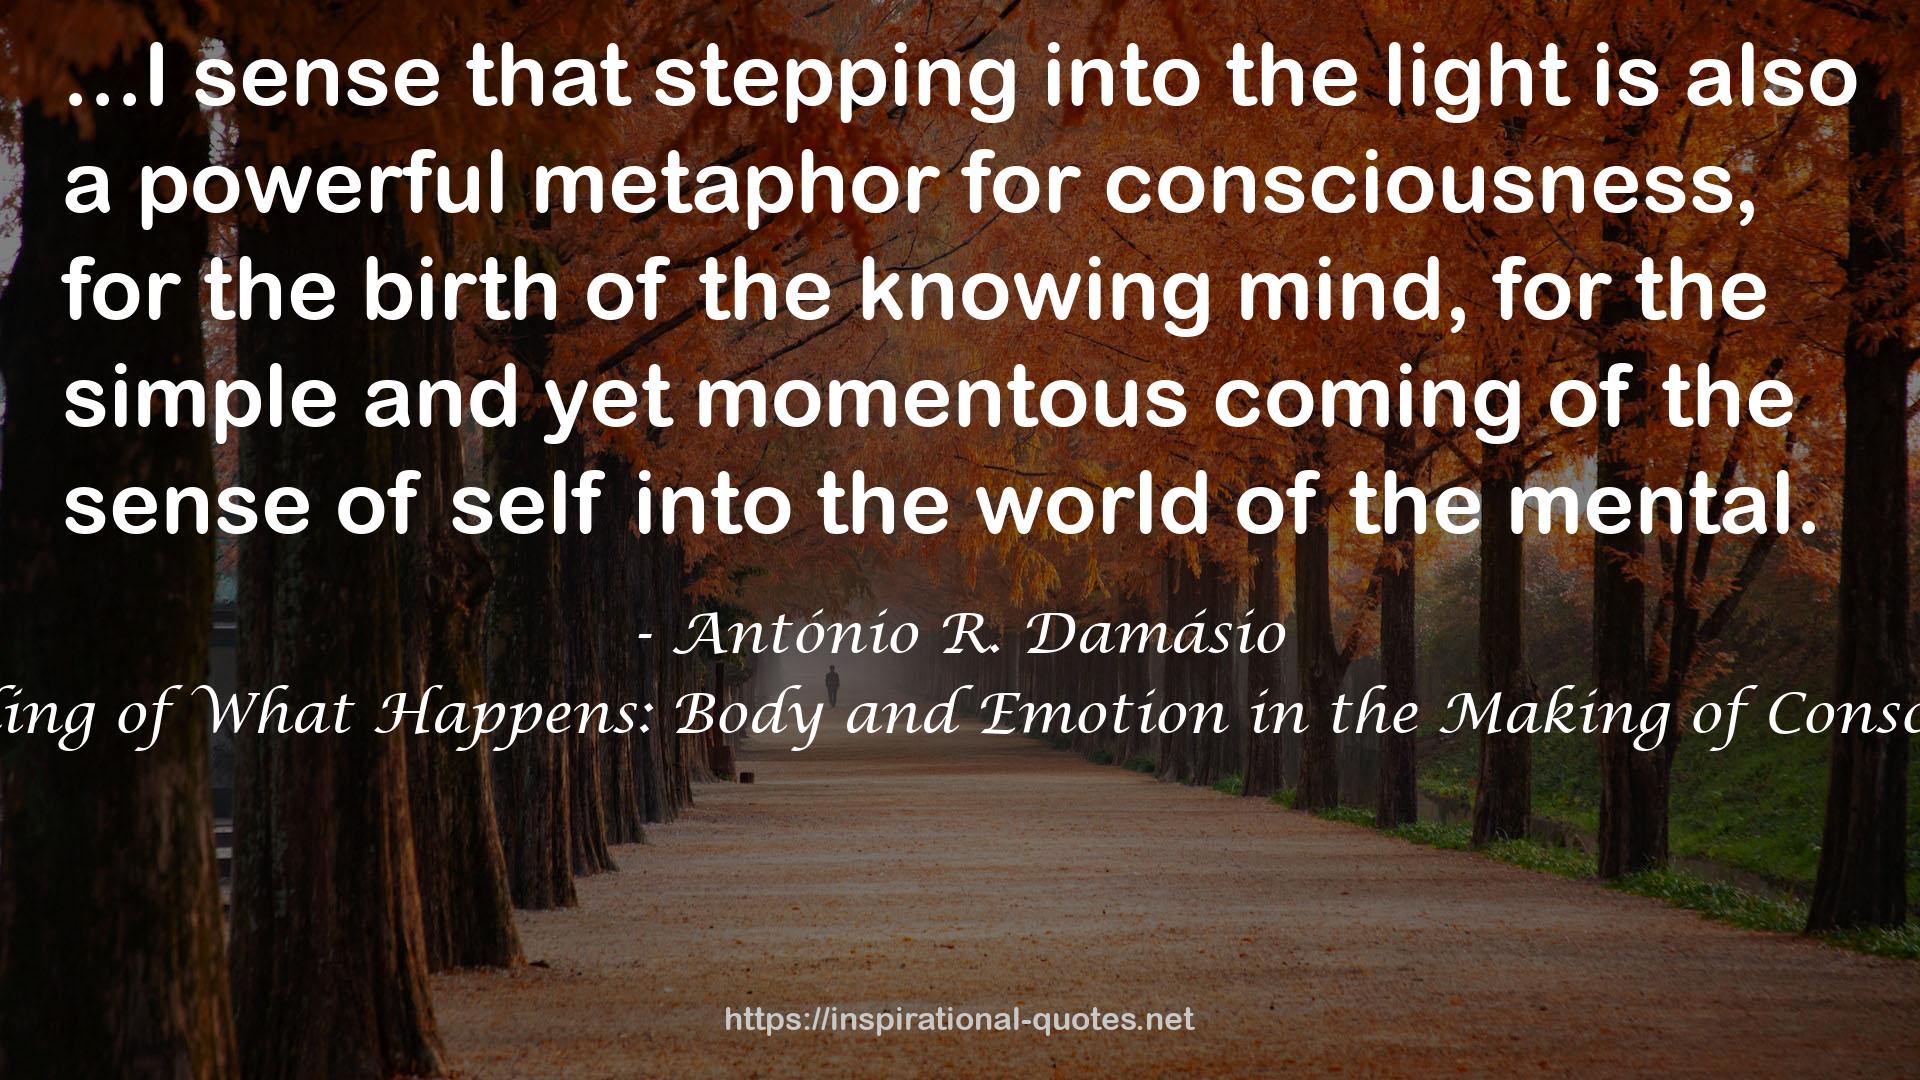 The Feeling of What Happens: Body and Emotion in the Making of Consciousness QUOTES